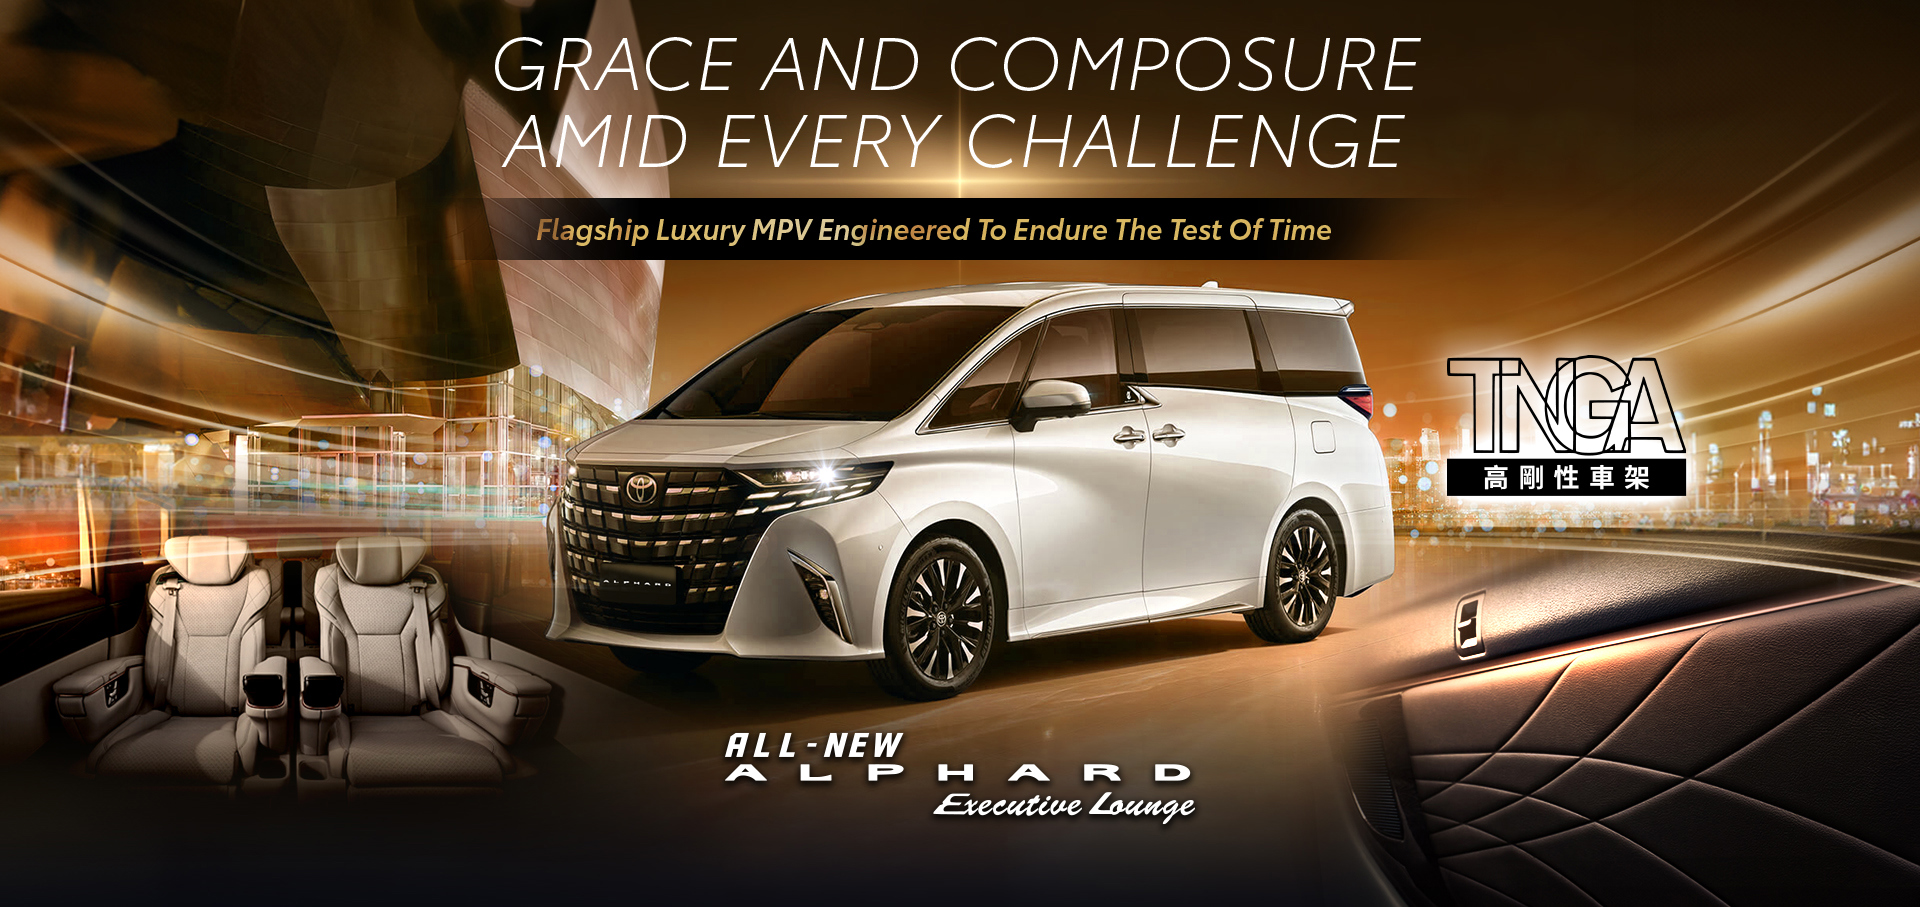 ALPHARD Executive Lounge🔸Grace and Composure Amid Every Challenge